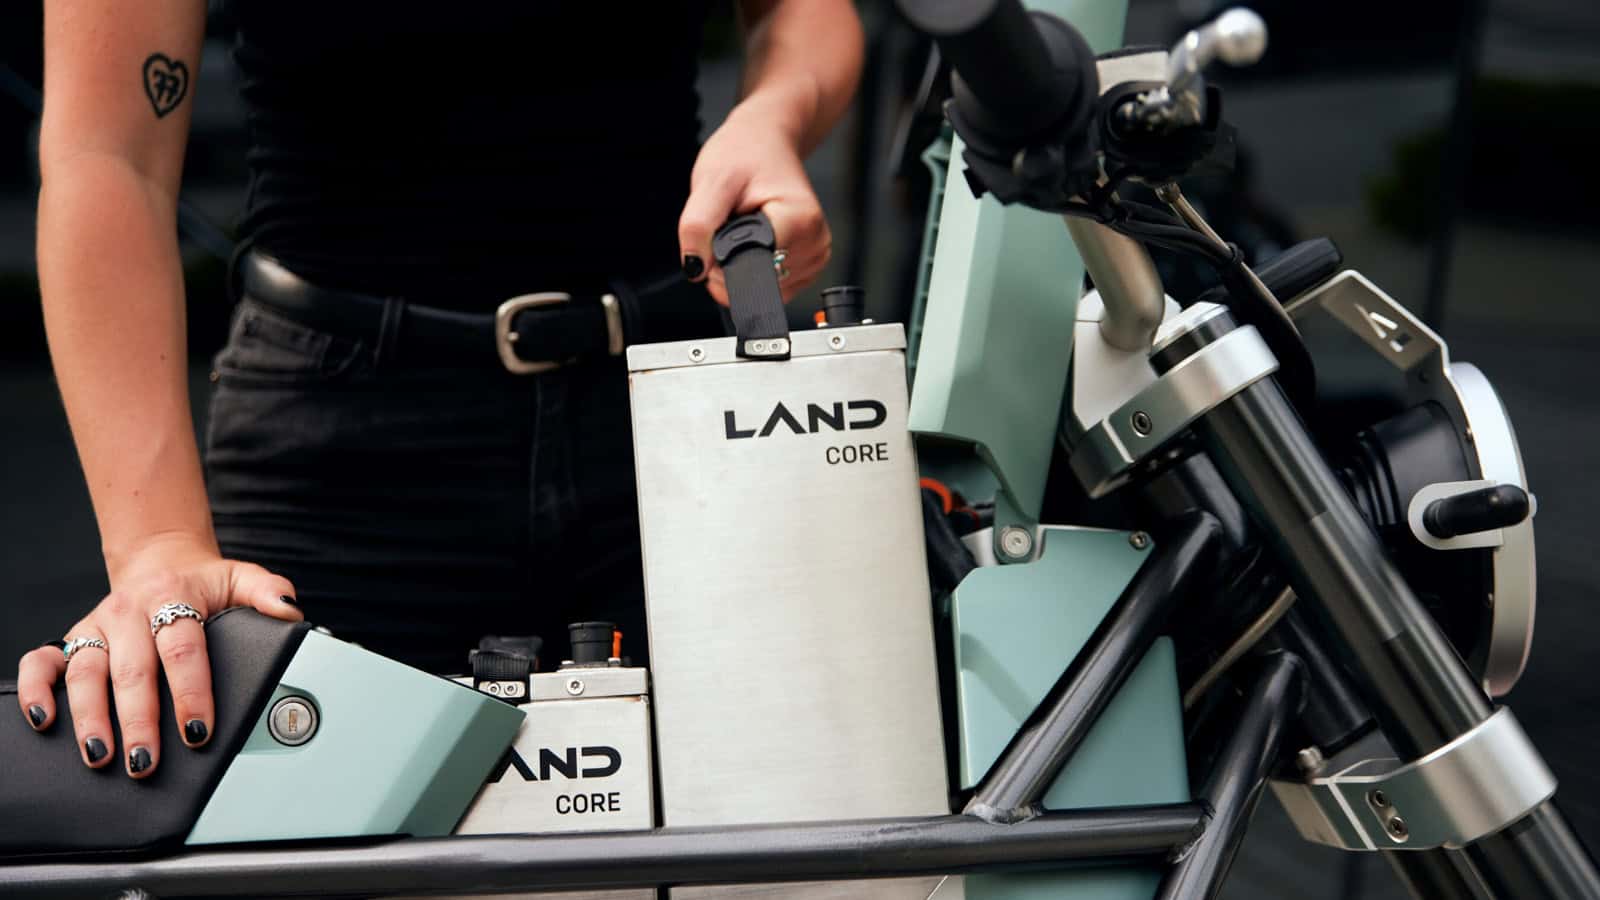 LAND Joins Bloom to Power Electric Mobility with Advanced Batteries - CORE battery